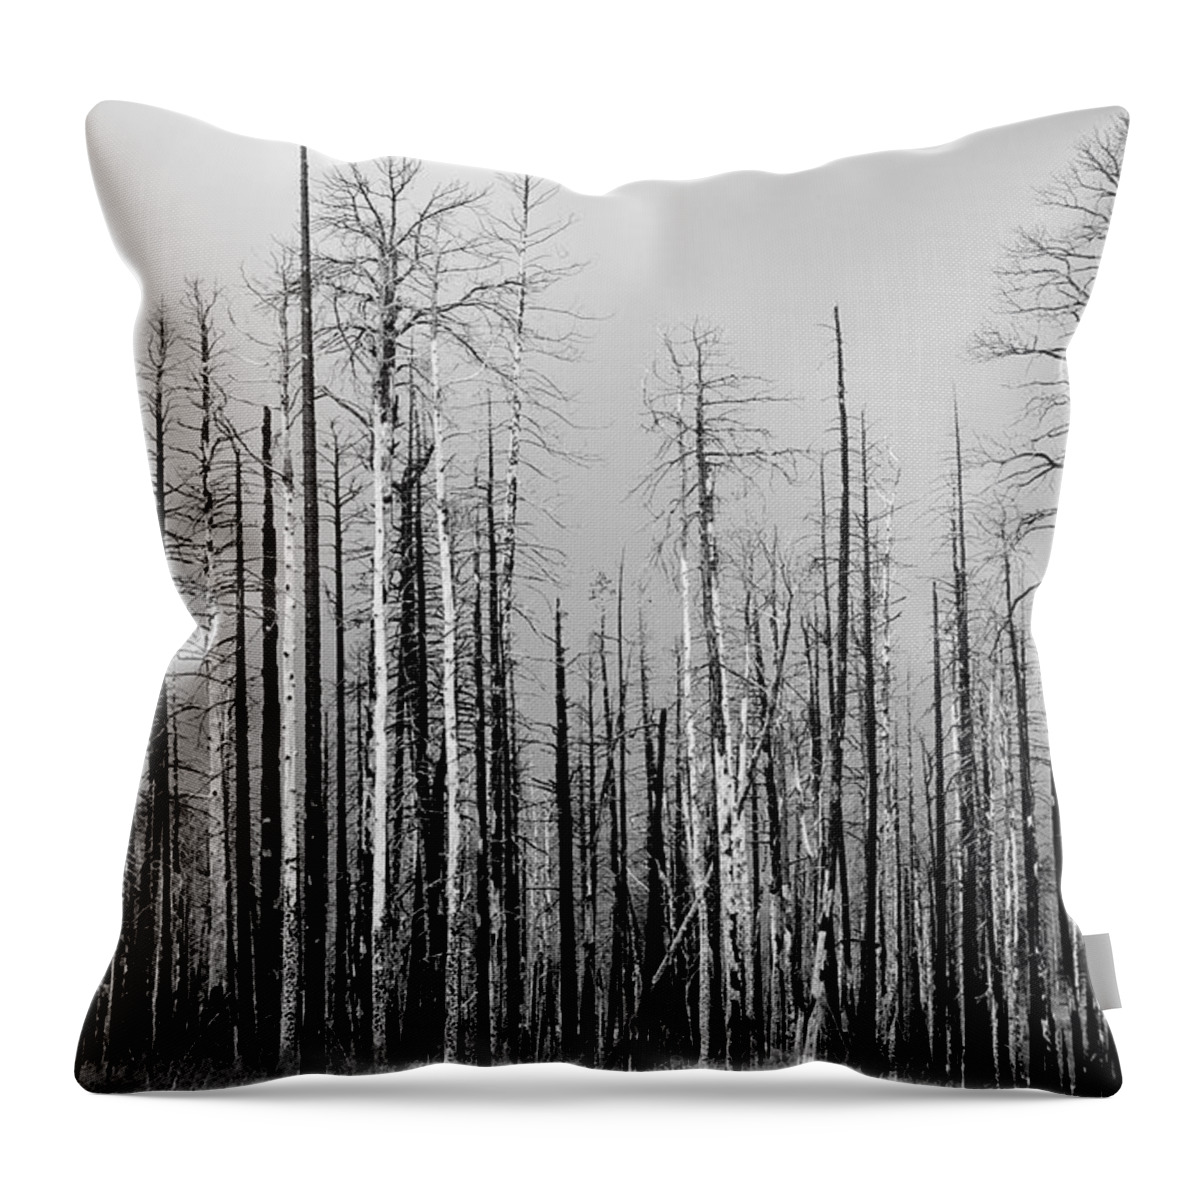 Charred Throw Pillow featuring the photograph Charred Trees by James BO Insogna